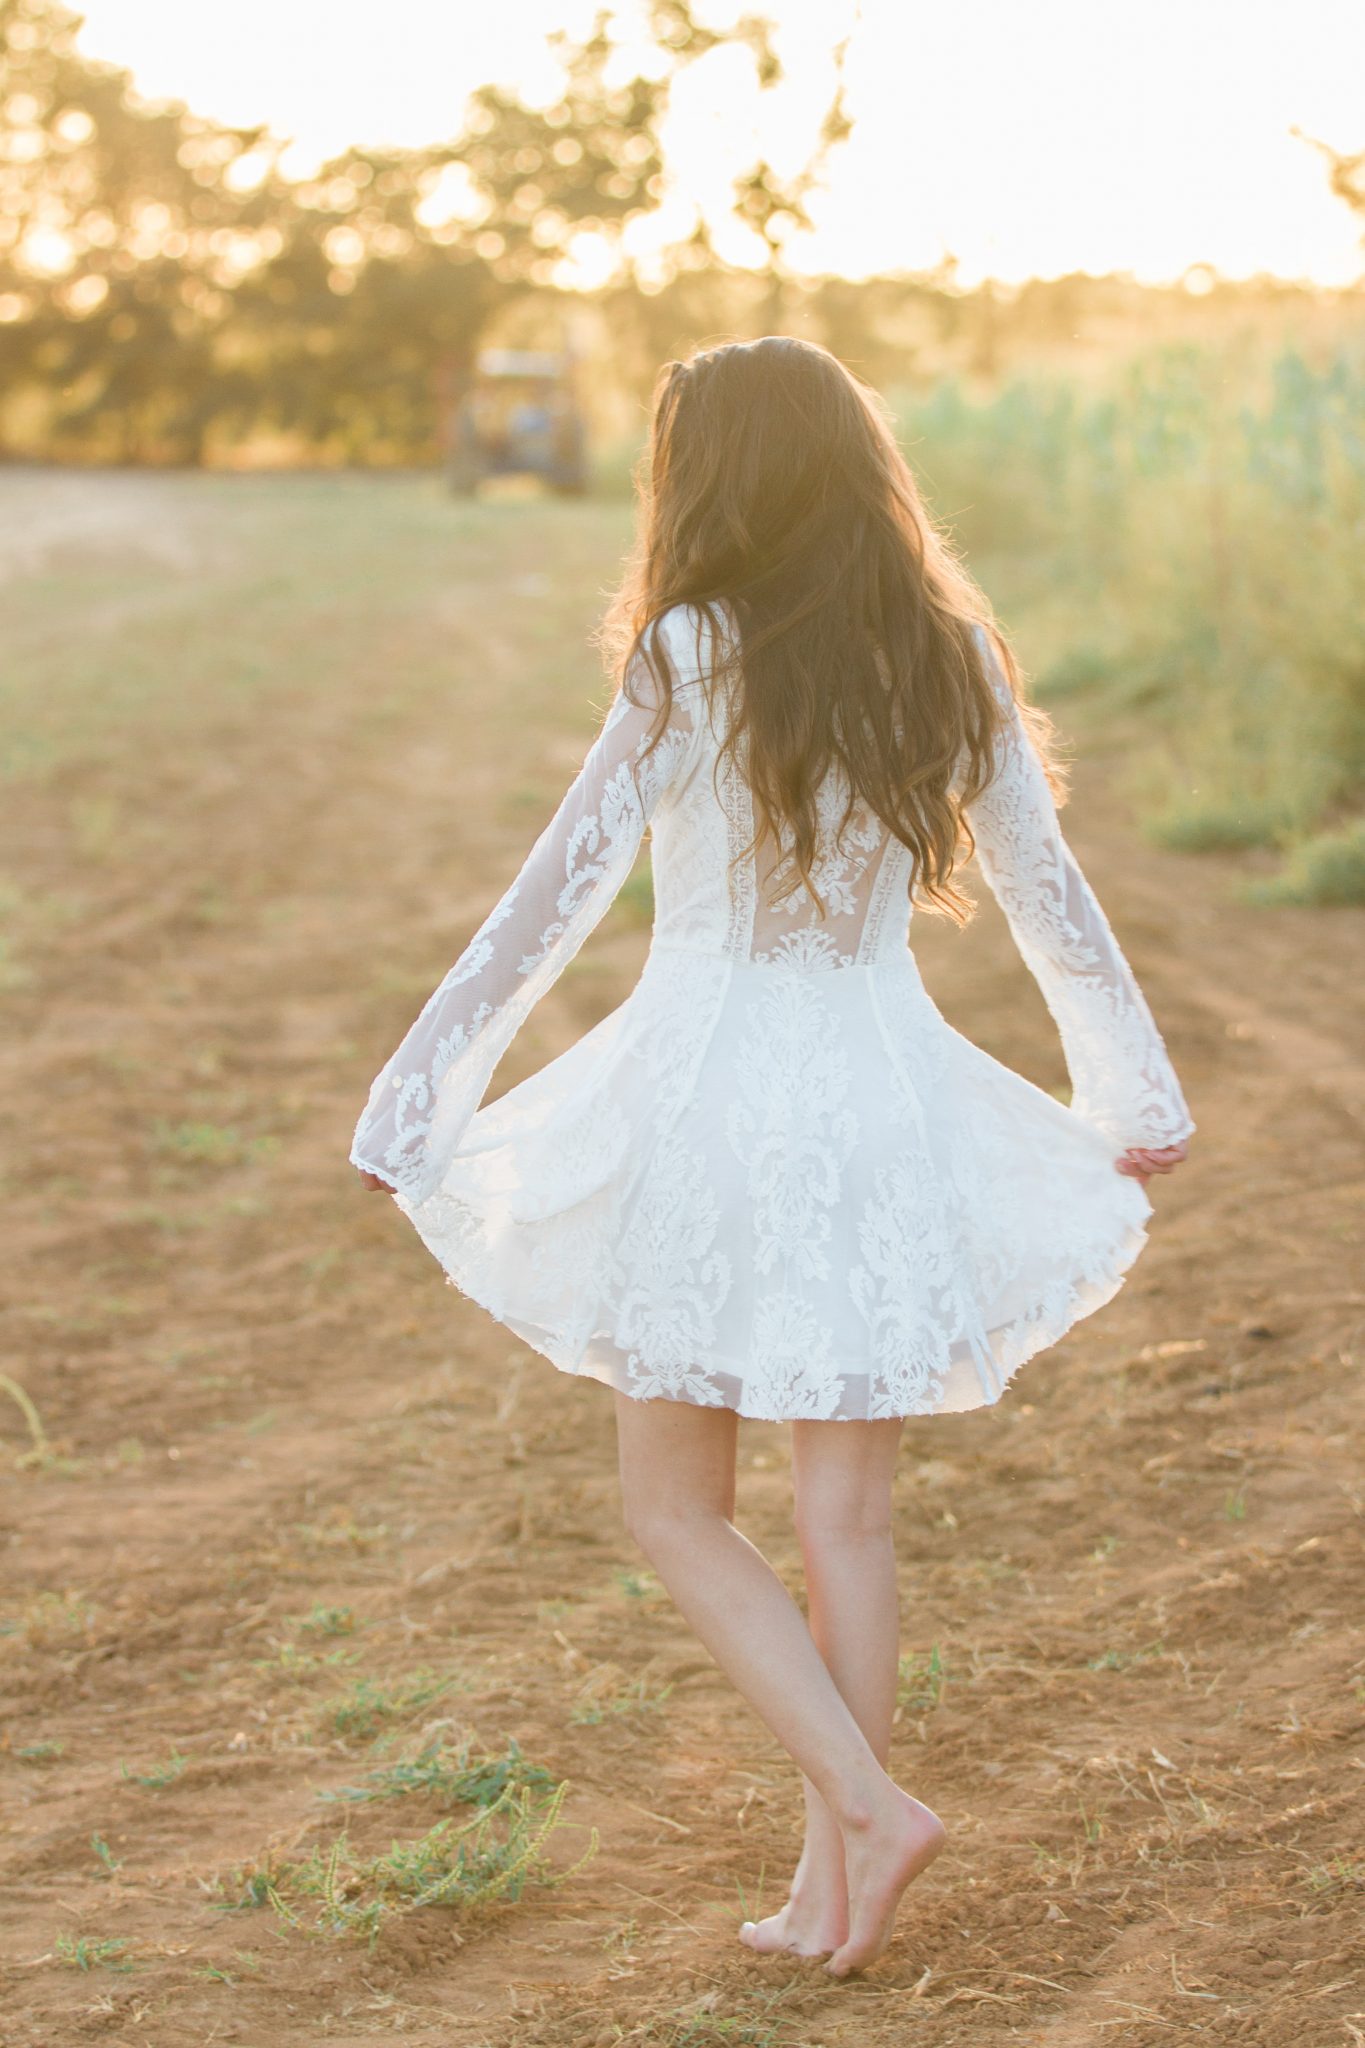 sundress in the fall, how to wear summer clothes in the fall, backlight, cornfield, fall outfit ideas